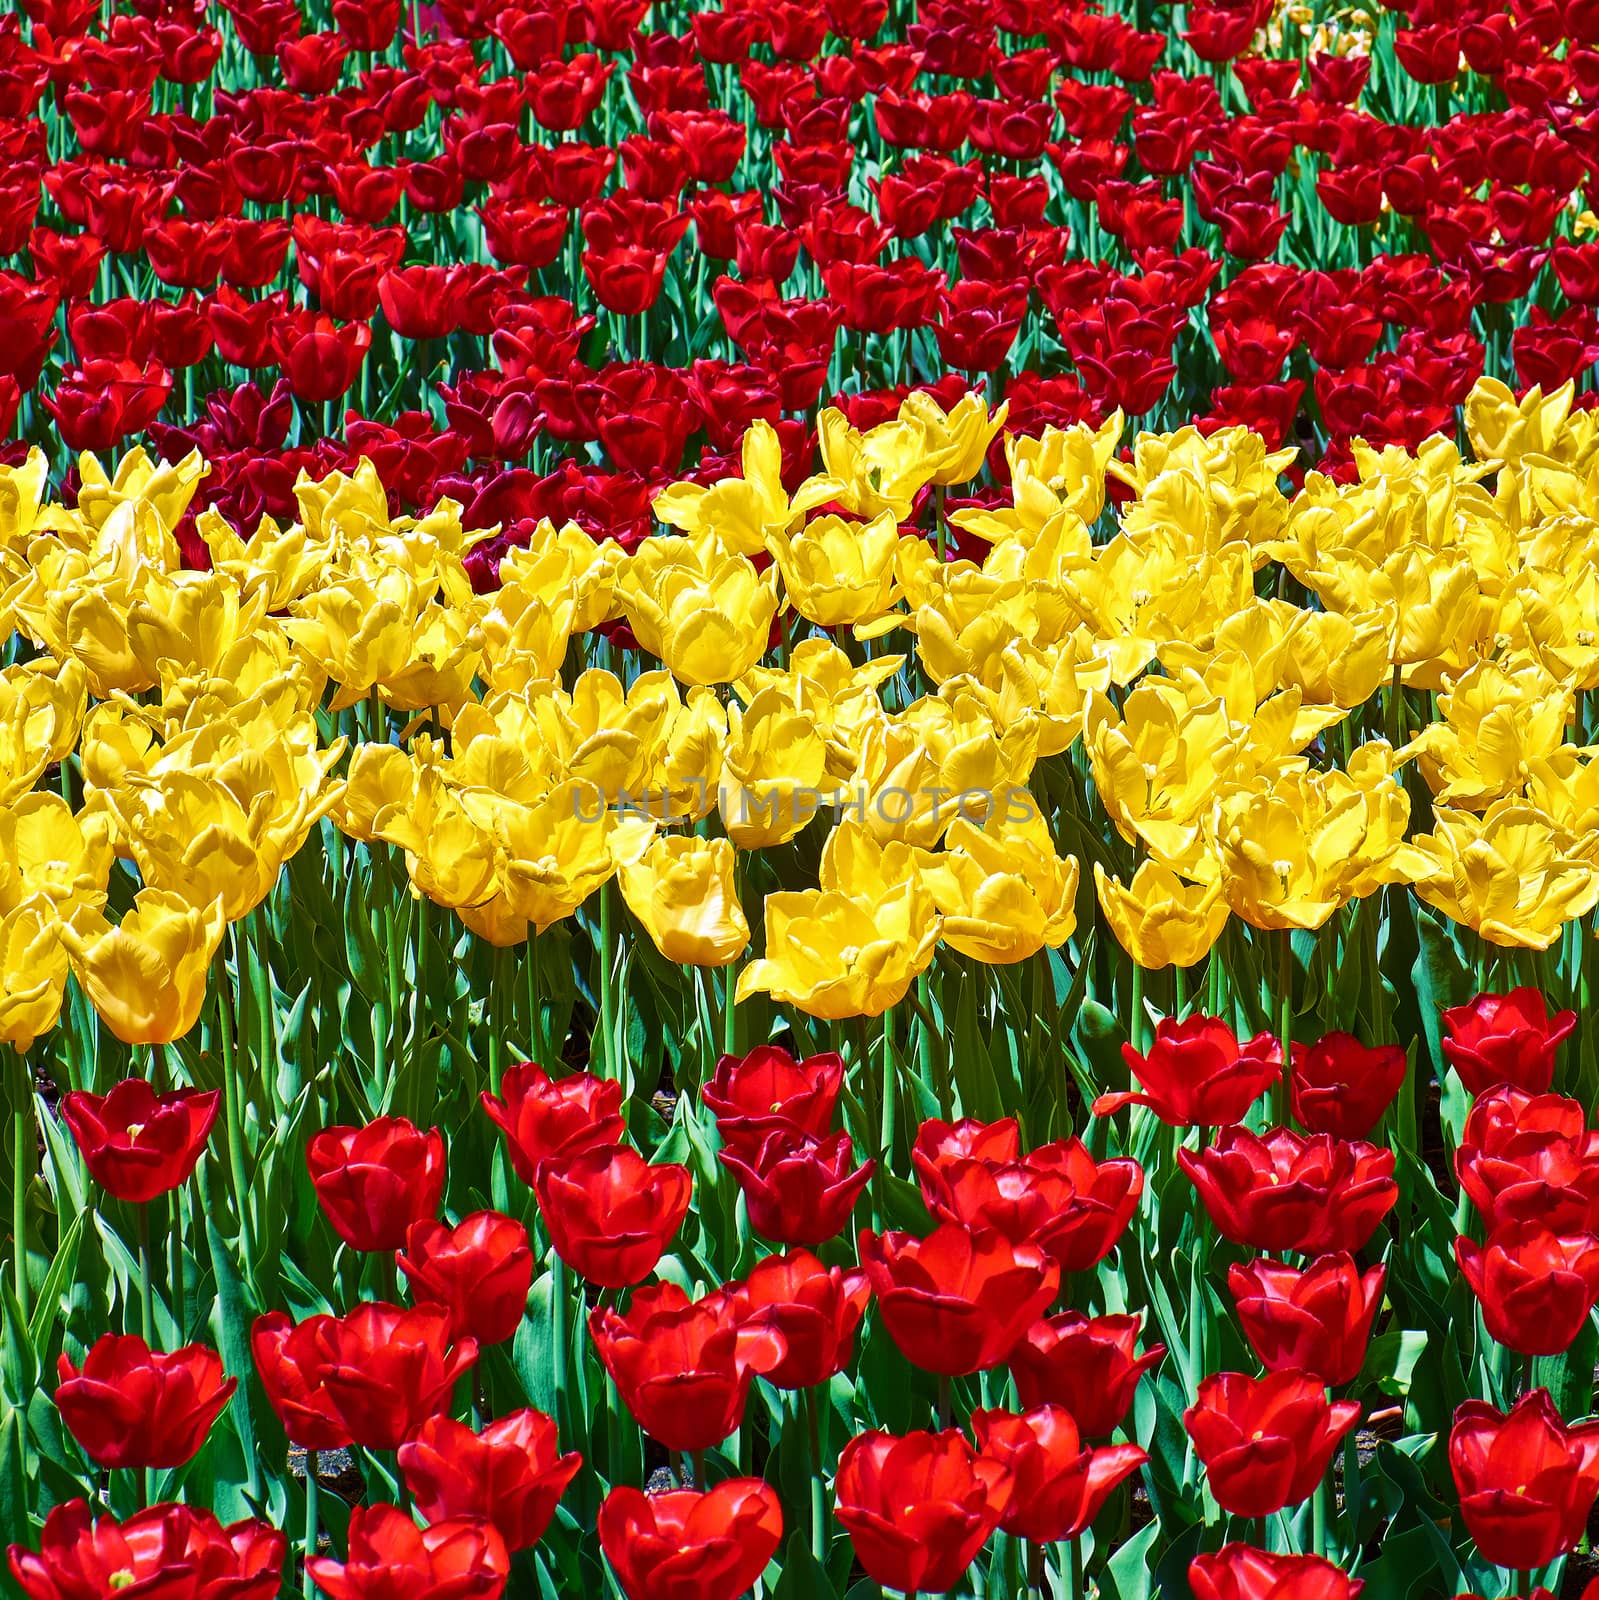 Red and yellow tulips growing stripes, square